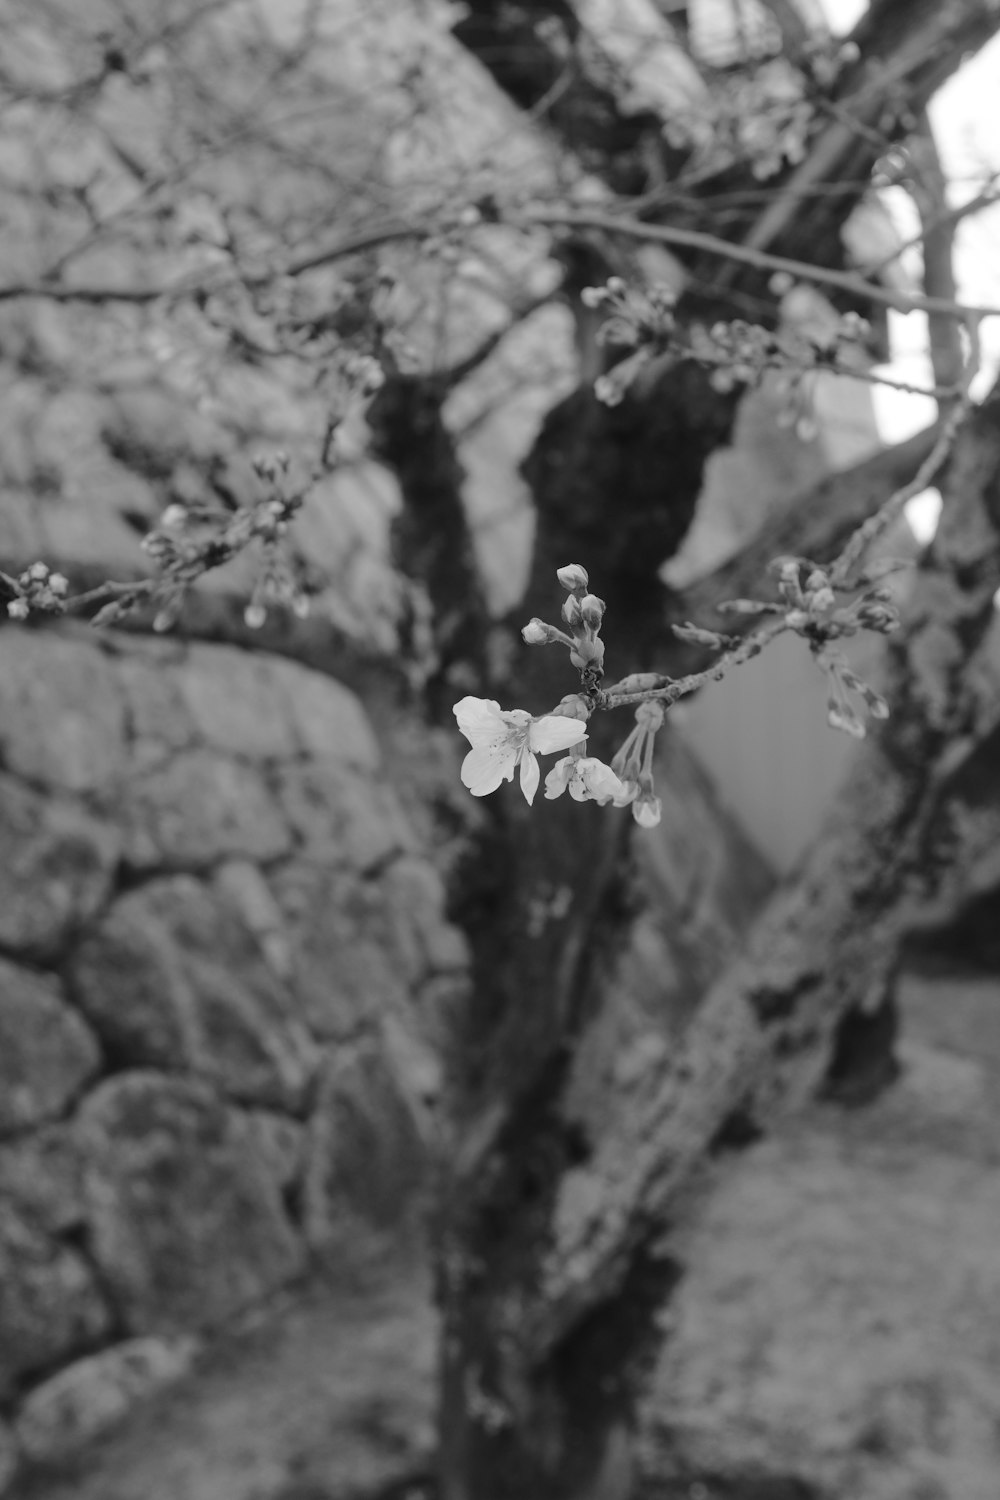 a black and white photo of a tree with flowers